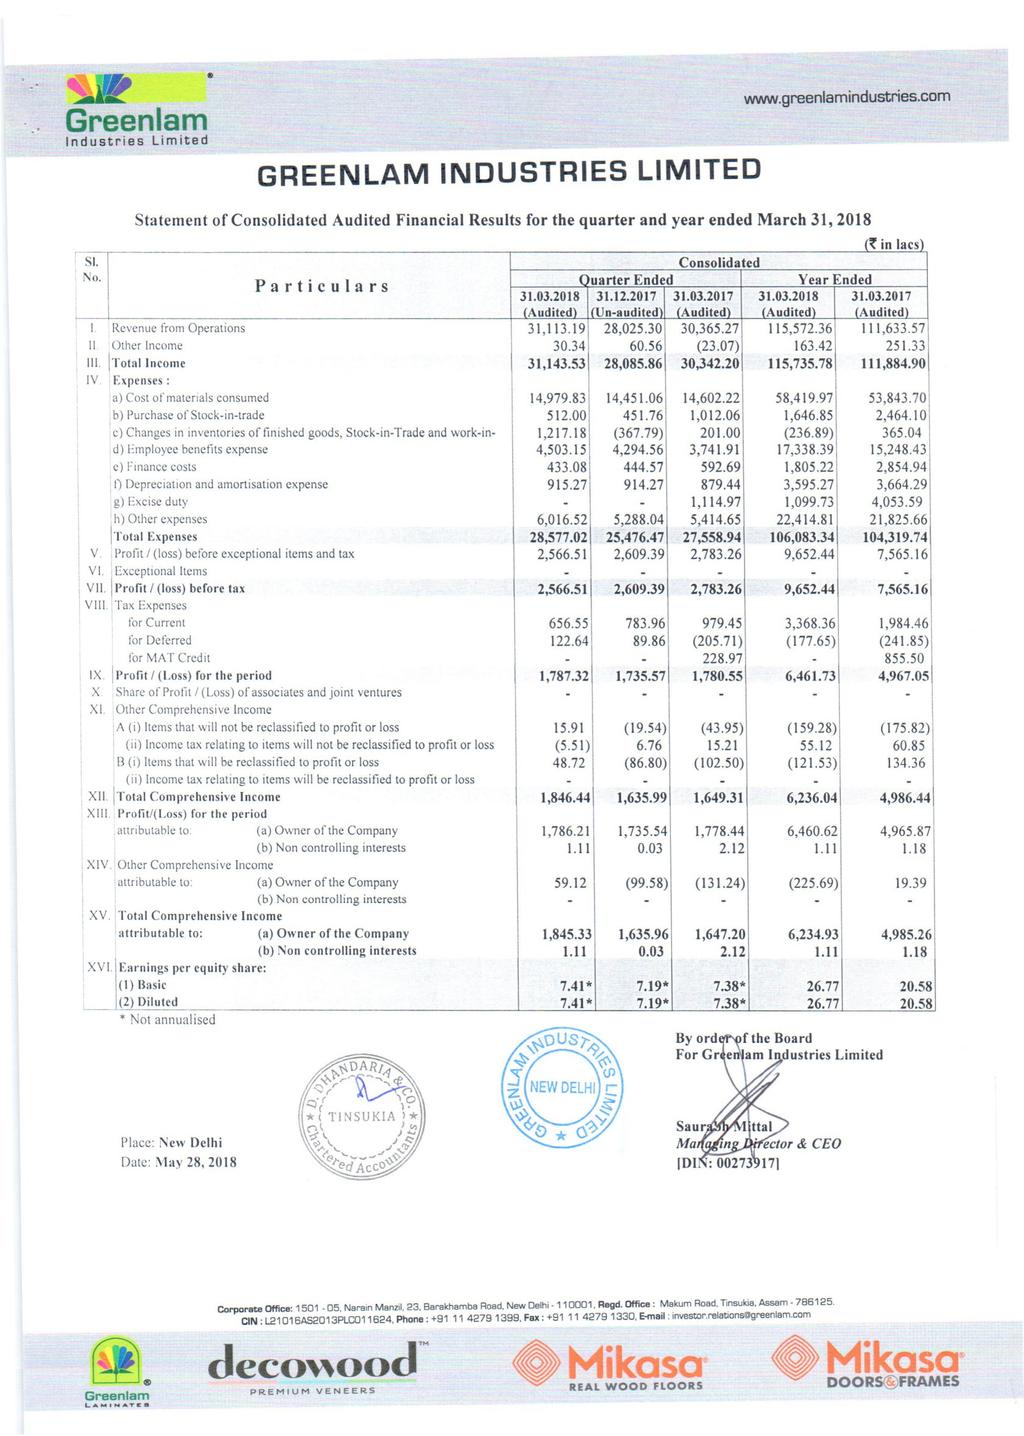 Afj/~ ndustries Limited " GREENLAM NDUSTRES LMTED www.greenlamindustries.com Statement of Consolidated Audited Financial Results for the quarter and year ended March 31, 2018 ~ in lacs) S.